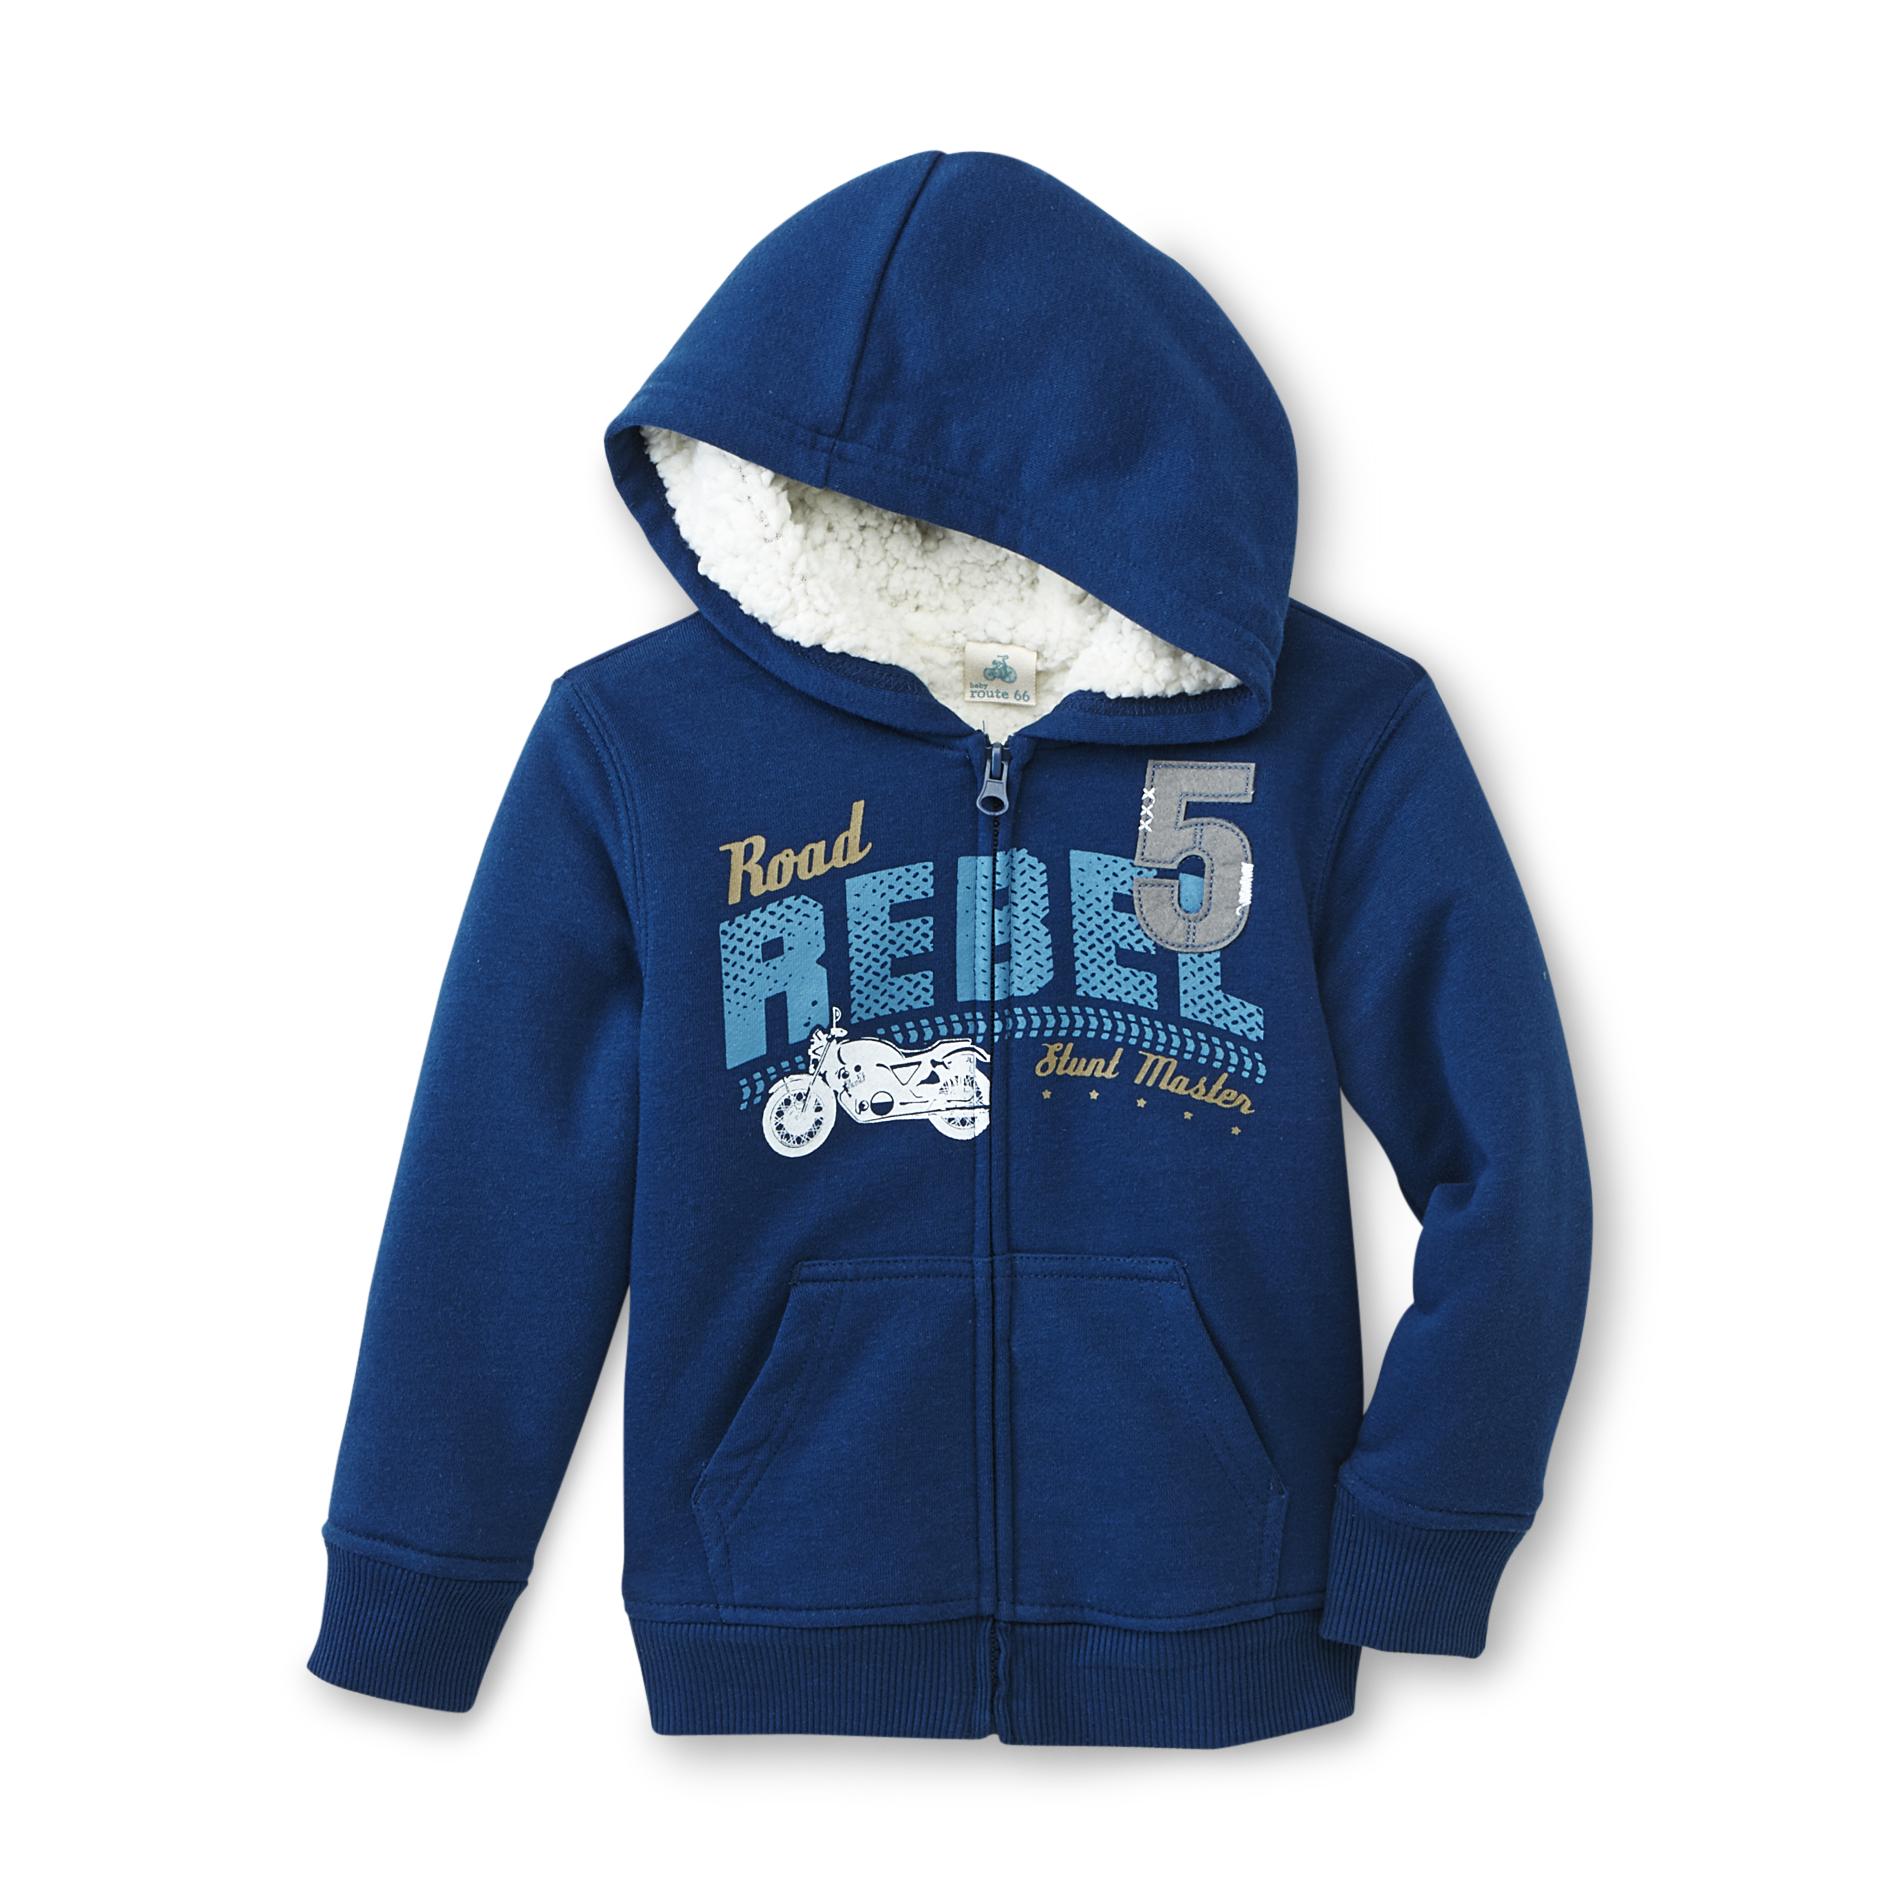 Route 66 Baby Infant & Toddler Boy's Graphic Hoodie Jacket - Motorcycle